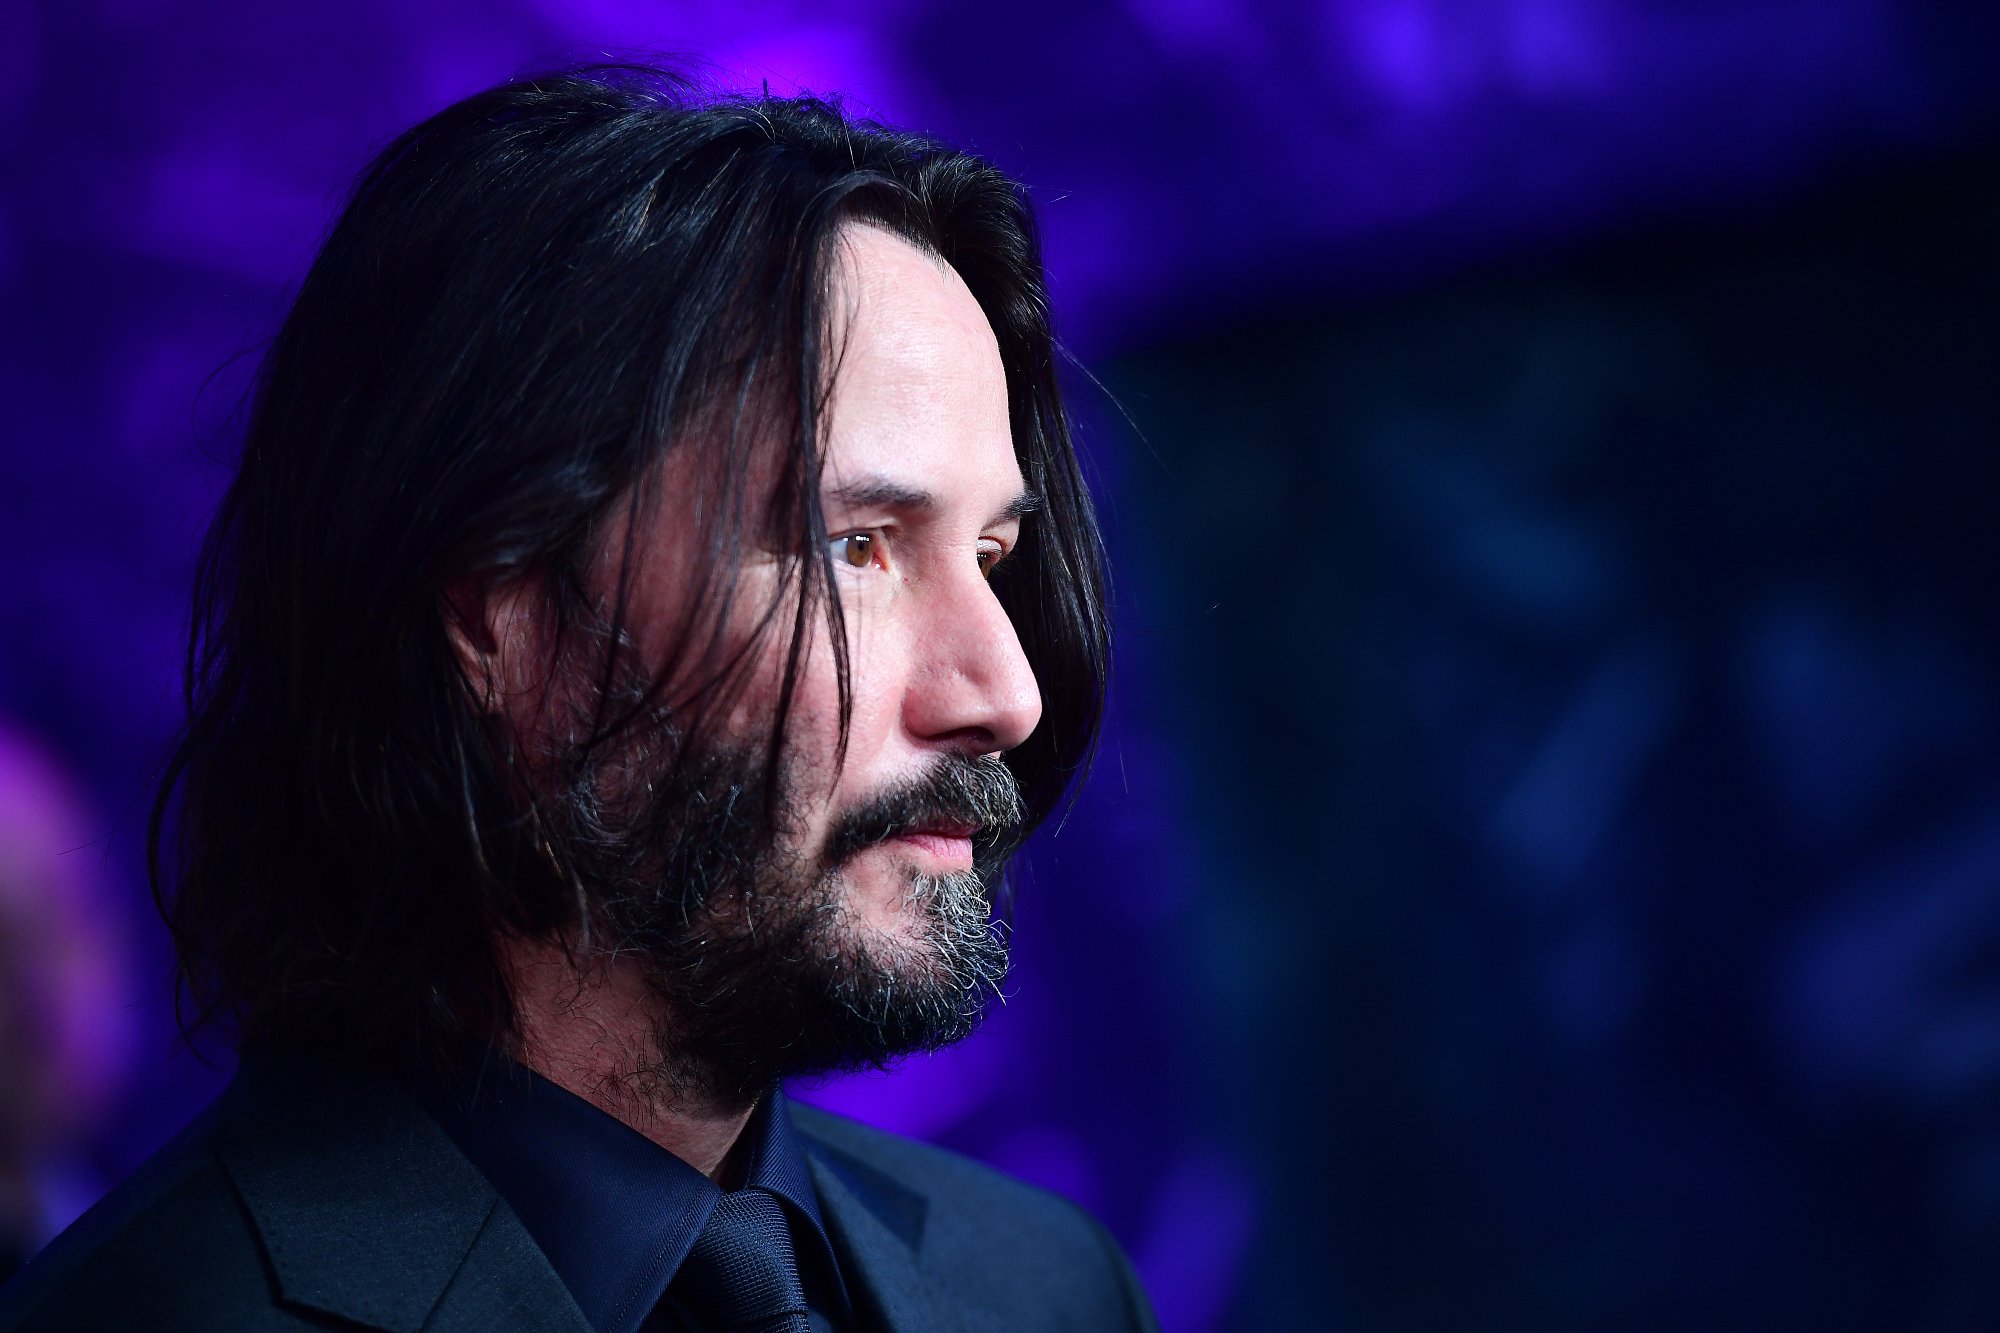 'John Wick 4' actor Keanu Reeves from the side in front of a purple background at the 'John Wick: Chapter 3 - Parabellum' Special Screening